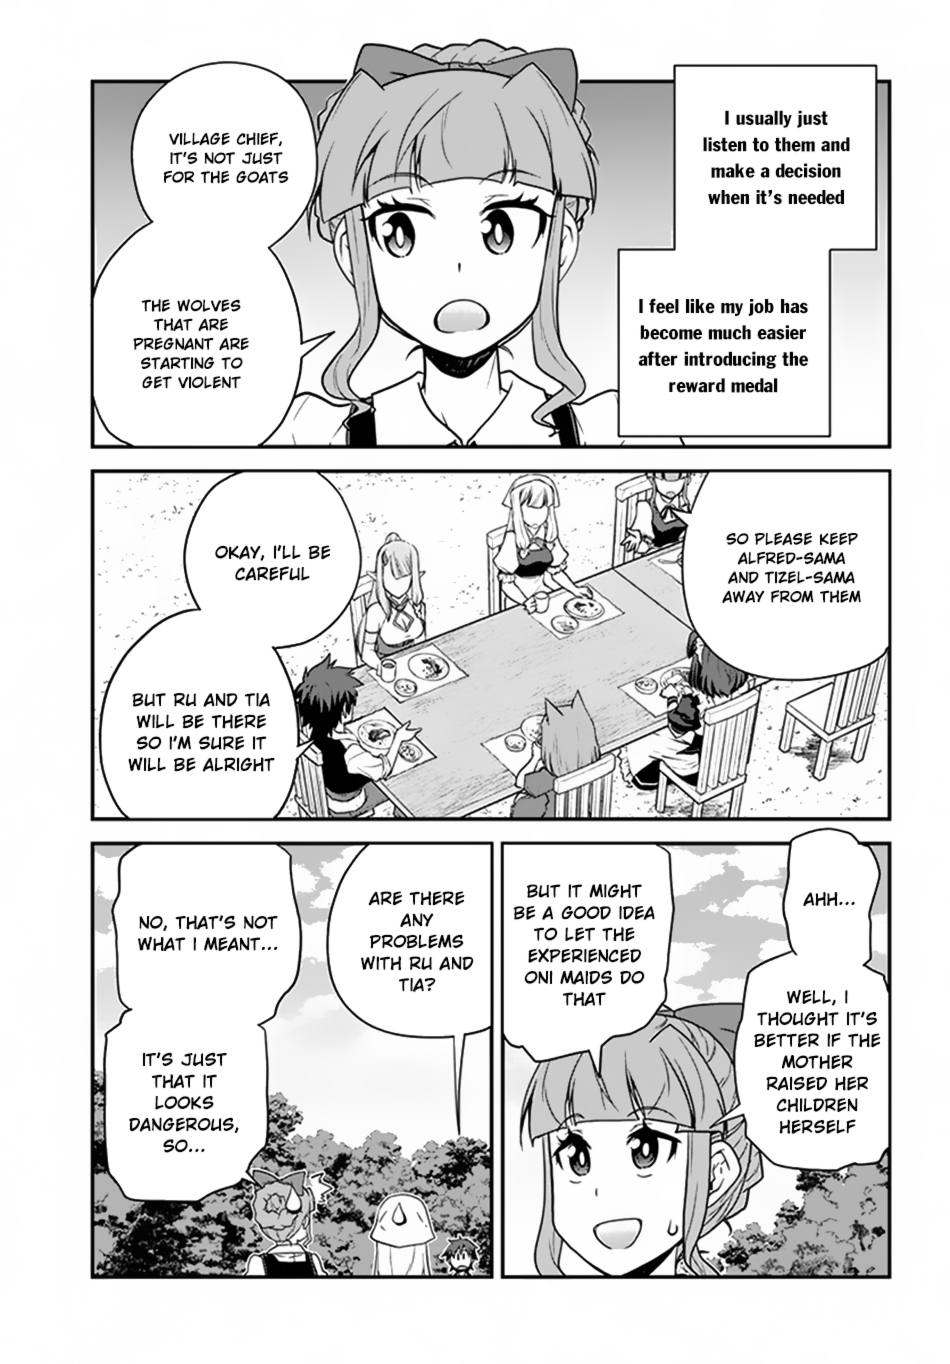 Isekai Nonbiri Nouka Ch. 67 A Normal Afternoon Evening in the Village Chief's Life